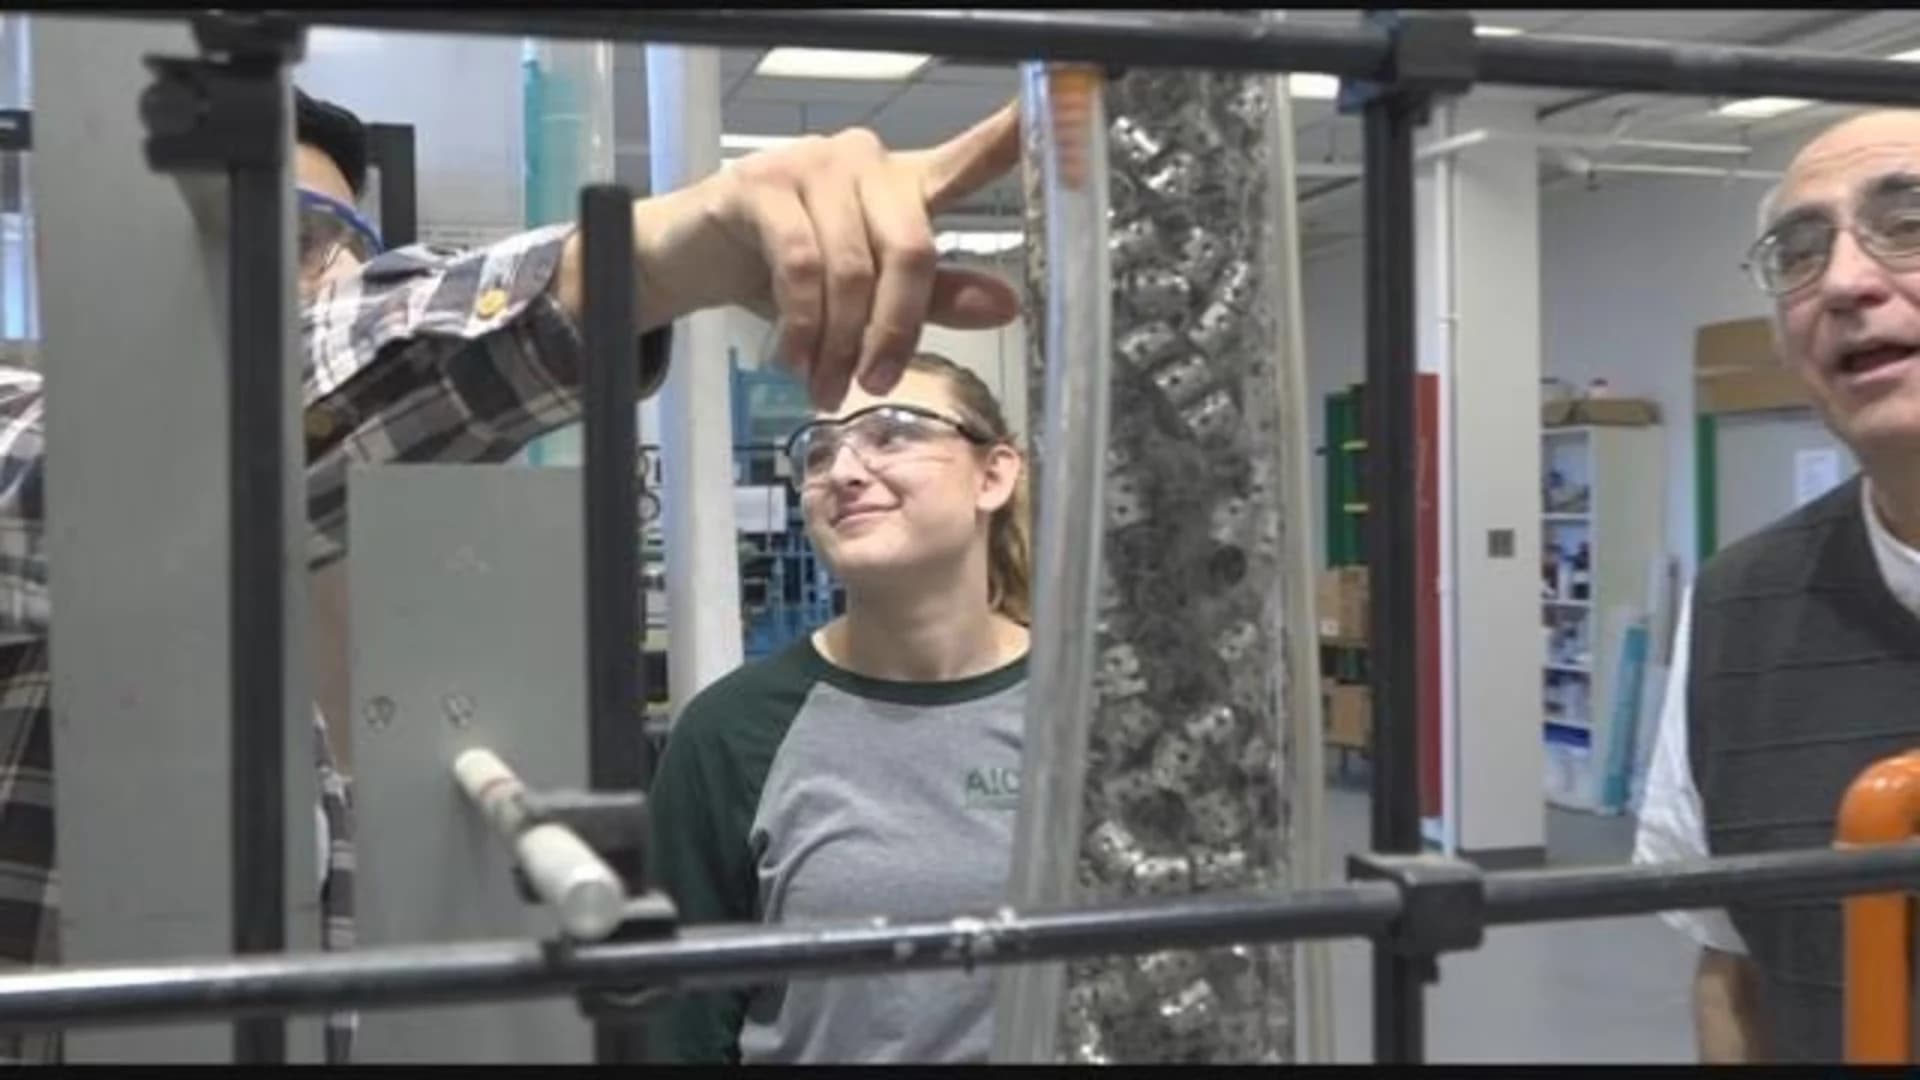 Bronx engineering students create water filtration system for school in Puerto Rico